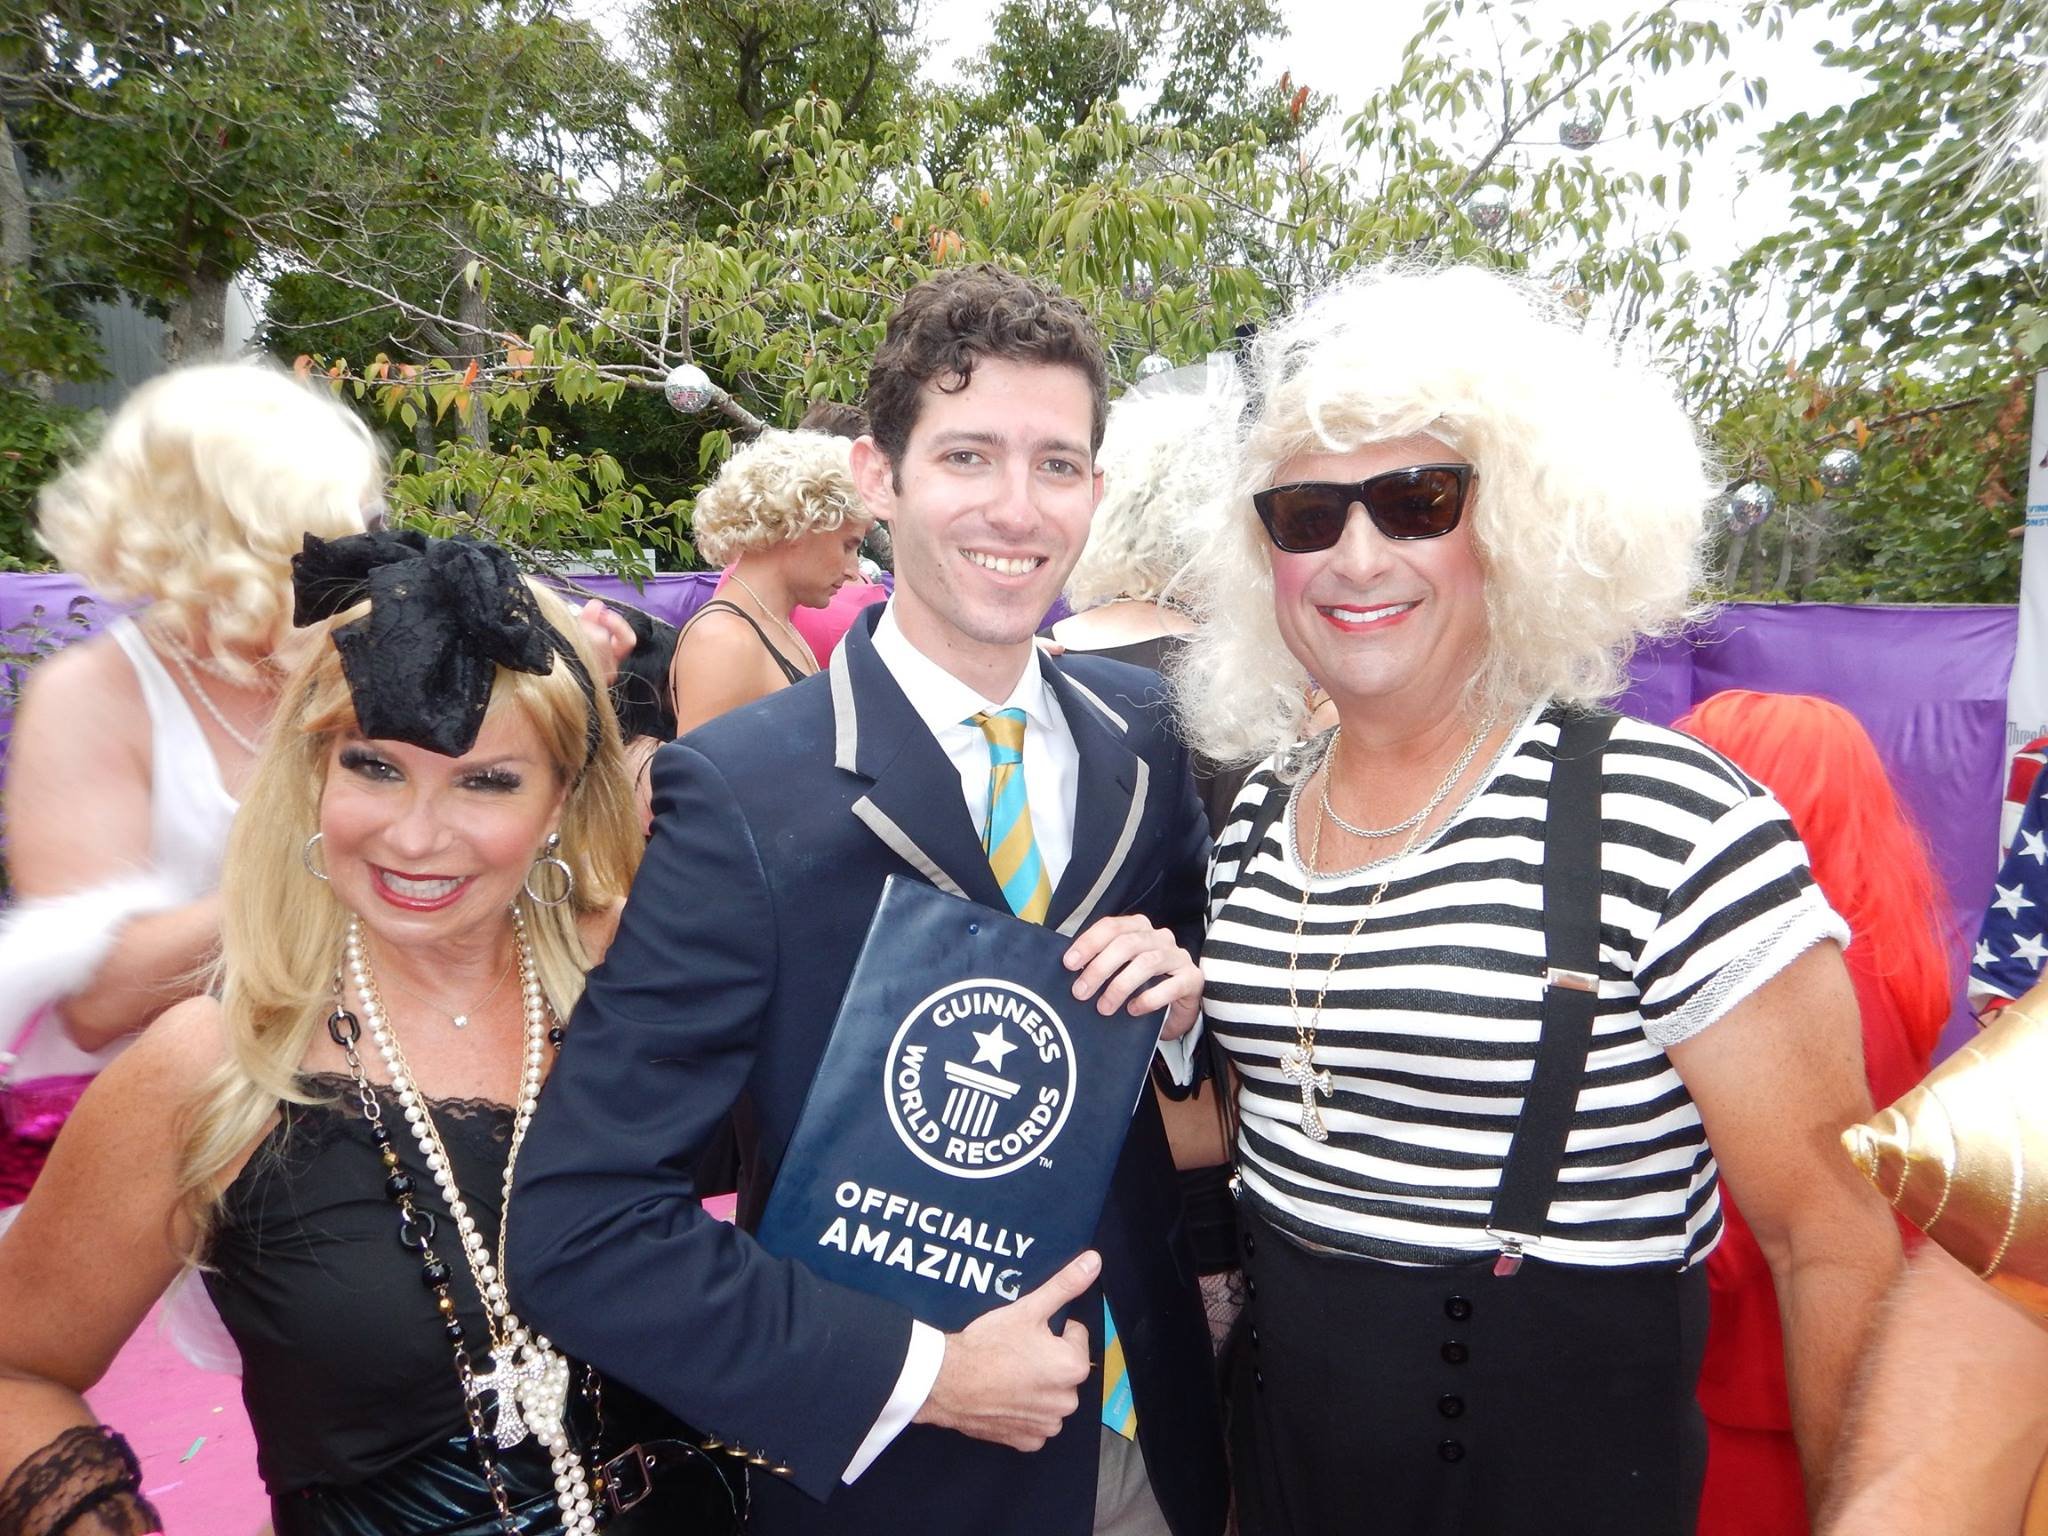 Fools Paradise Madonna Party 2014 Guinness book record.jpg